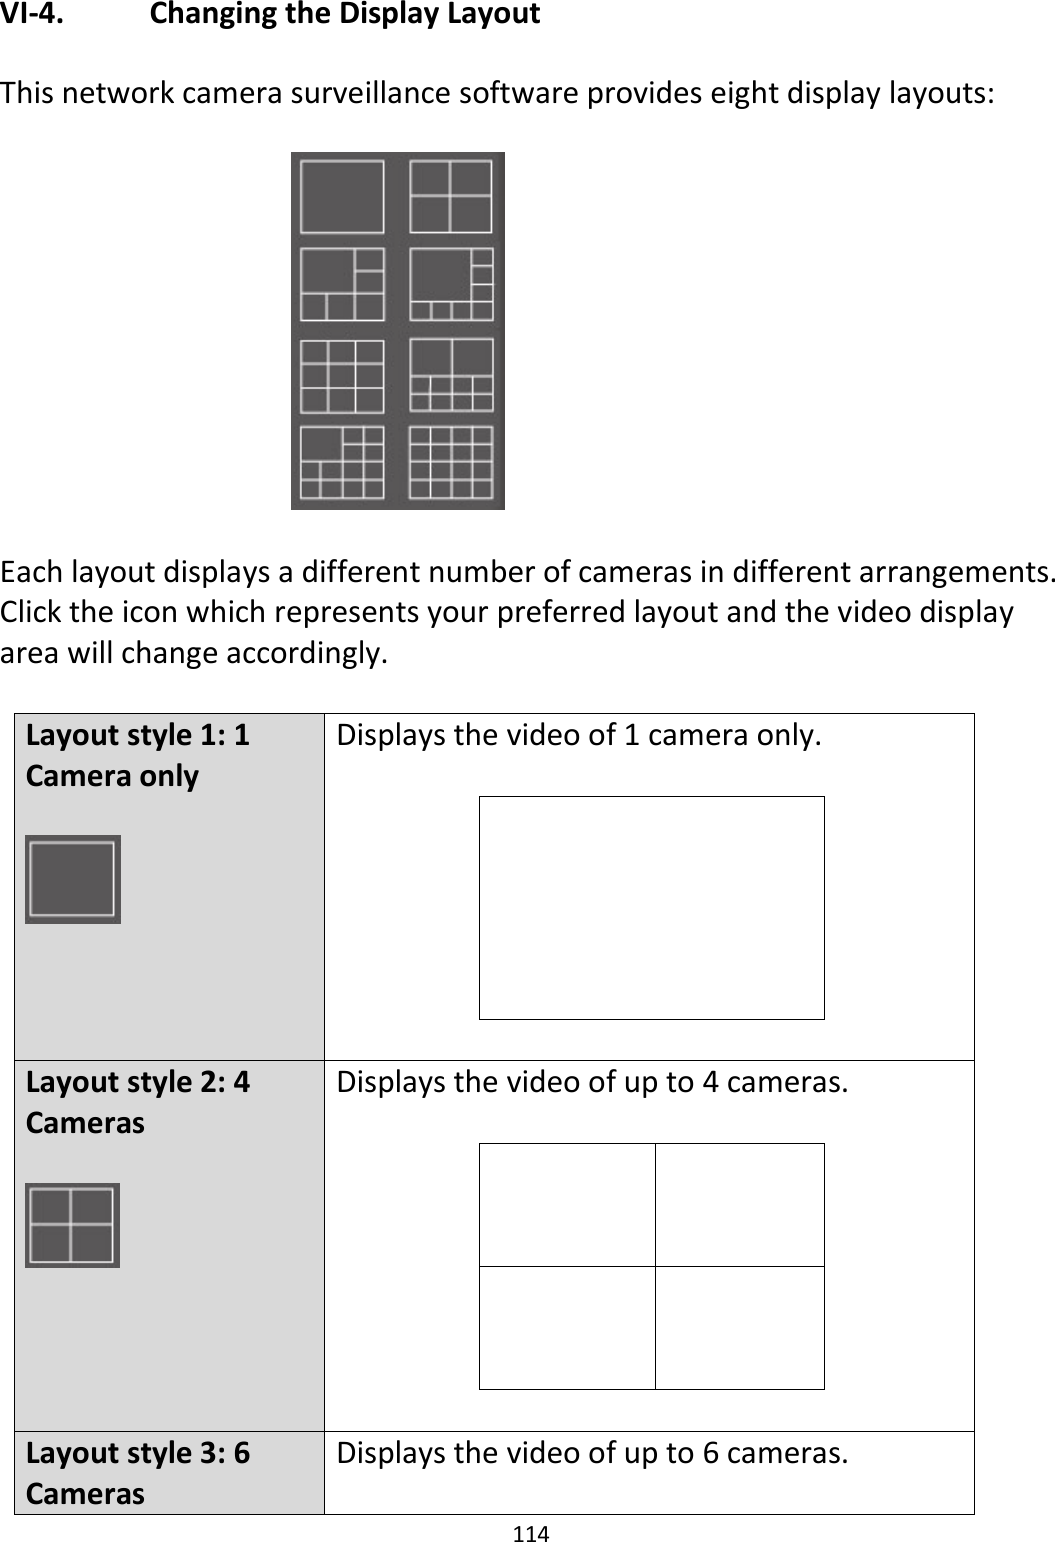 114  VI-4.    Changing the Display Layout  This network camera surveillance software provides eight display layouts:    Each layout displays a different number of cameras in different arrangements. Click the icon which represents your preferred layout and the video display area will change accordingly.  Layout style 1: 1 Camera only   Displays the video of 1 camera only.       Layout style 2: 4 Cameras   Displays the video of up to 4 cameras.             Layout style 3: 6 Cameras Displays the video of up to 6 cameras.  